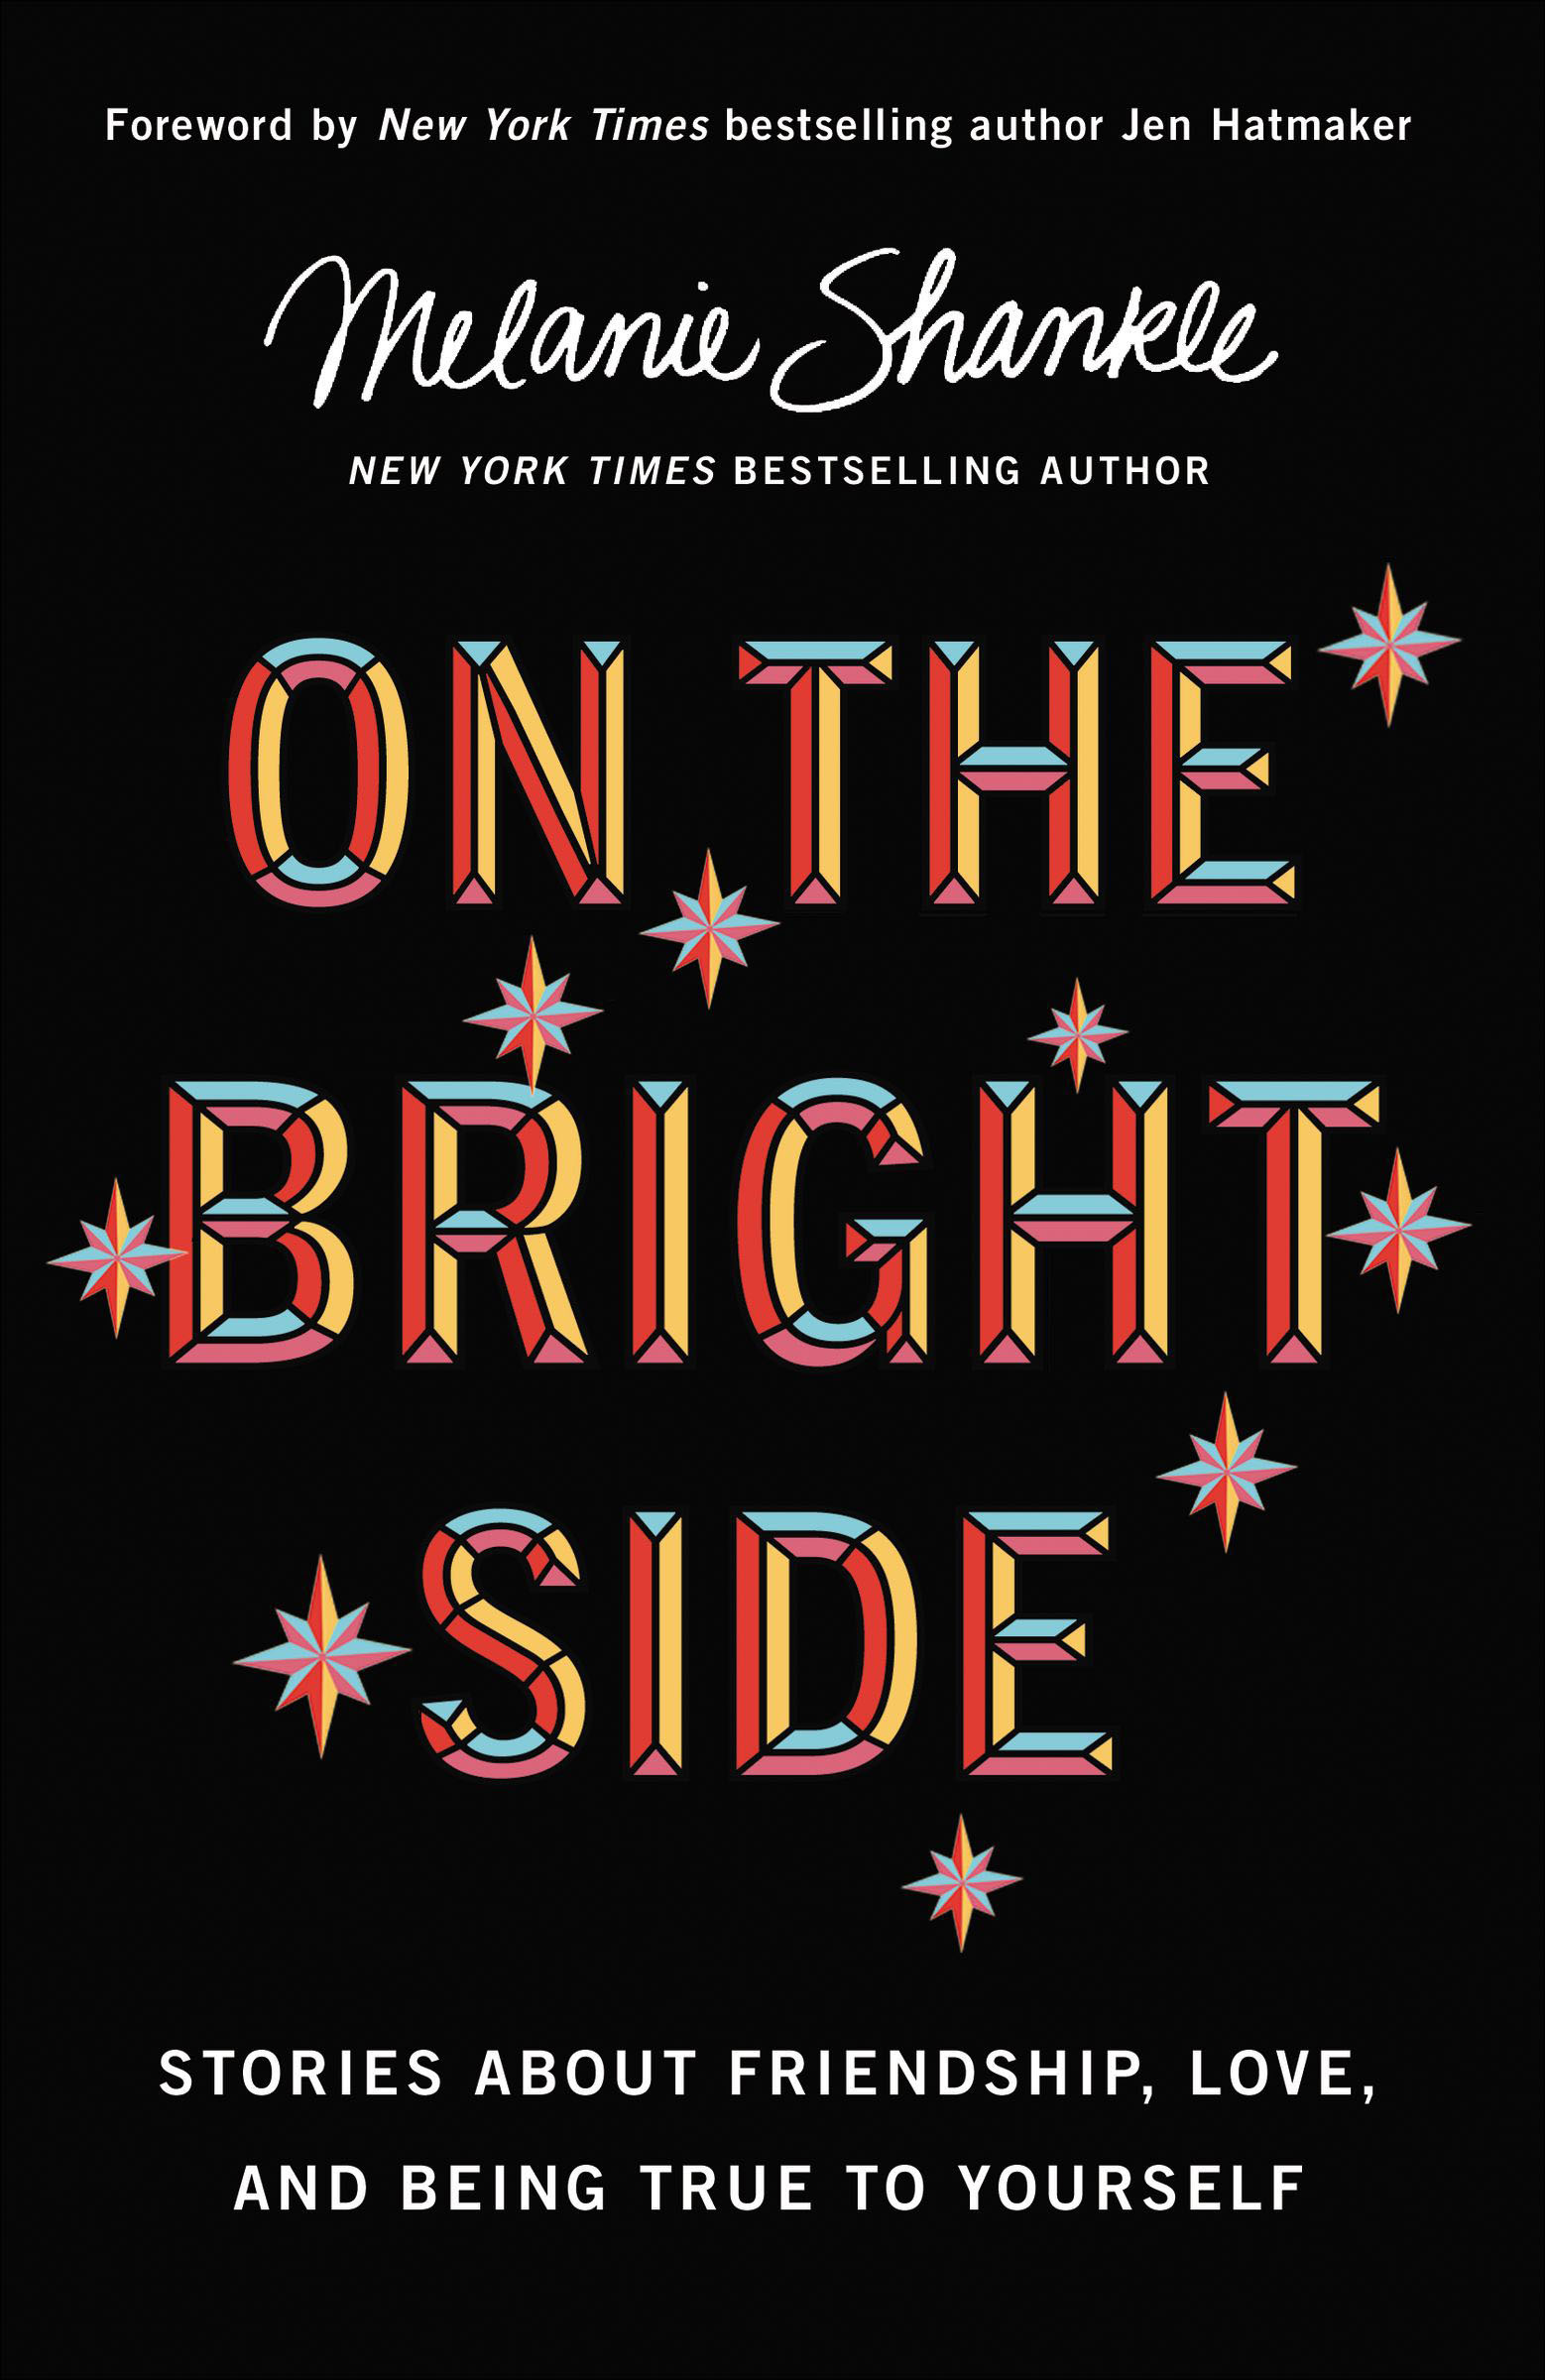 On the bright side cover image